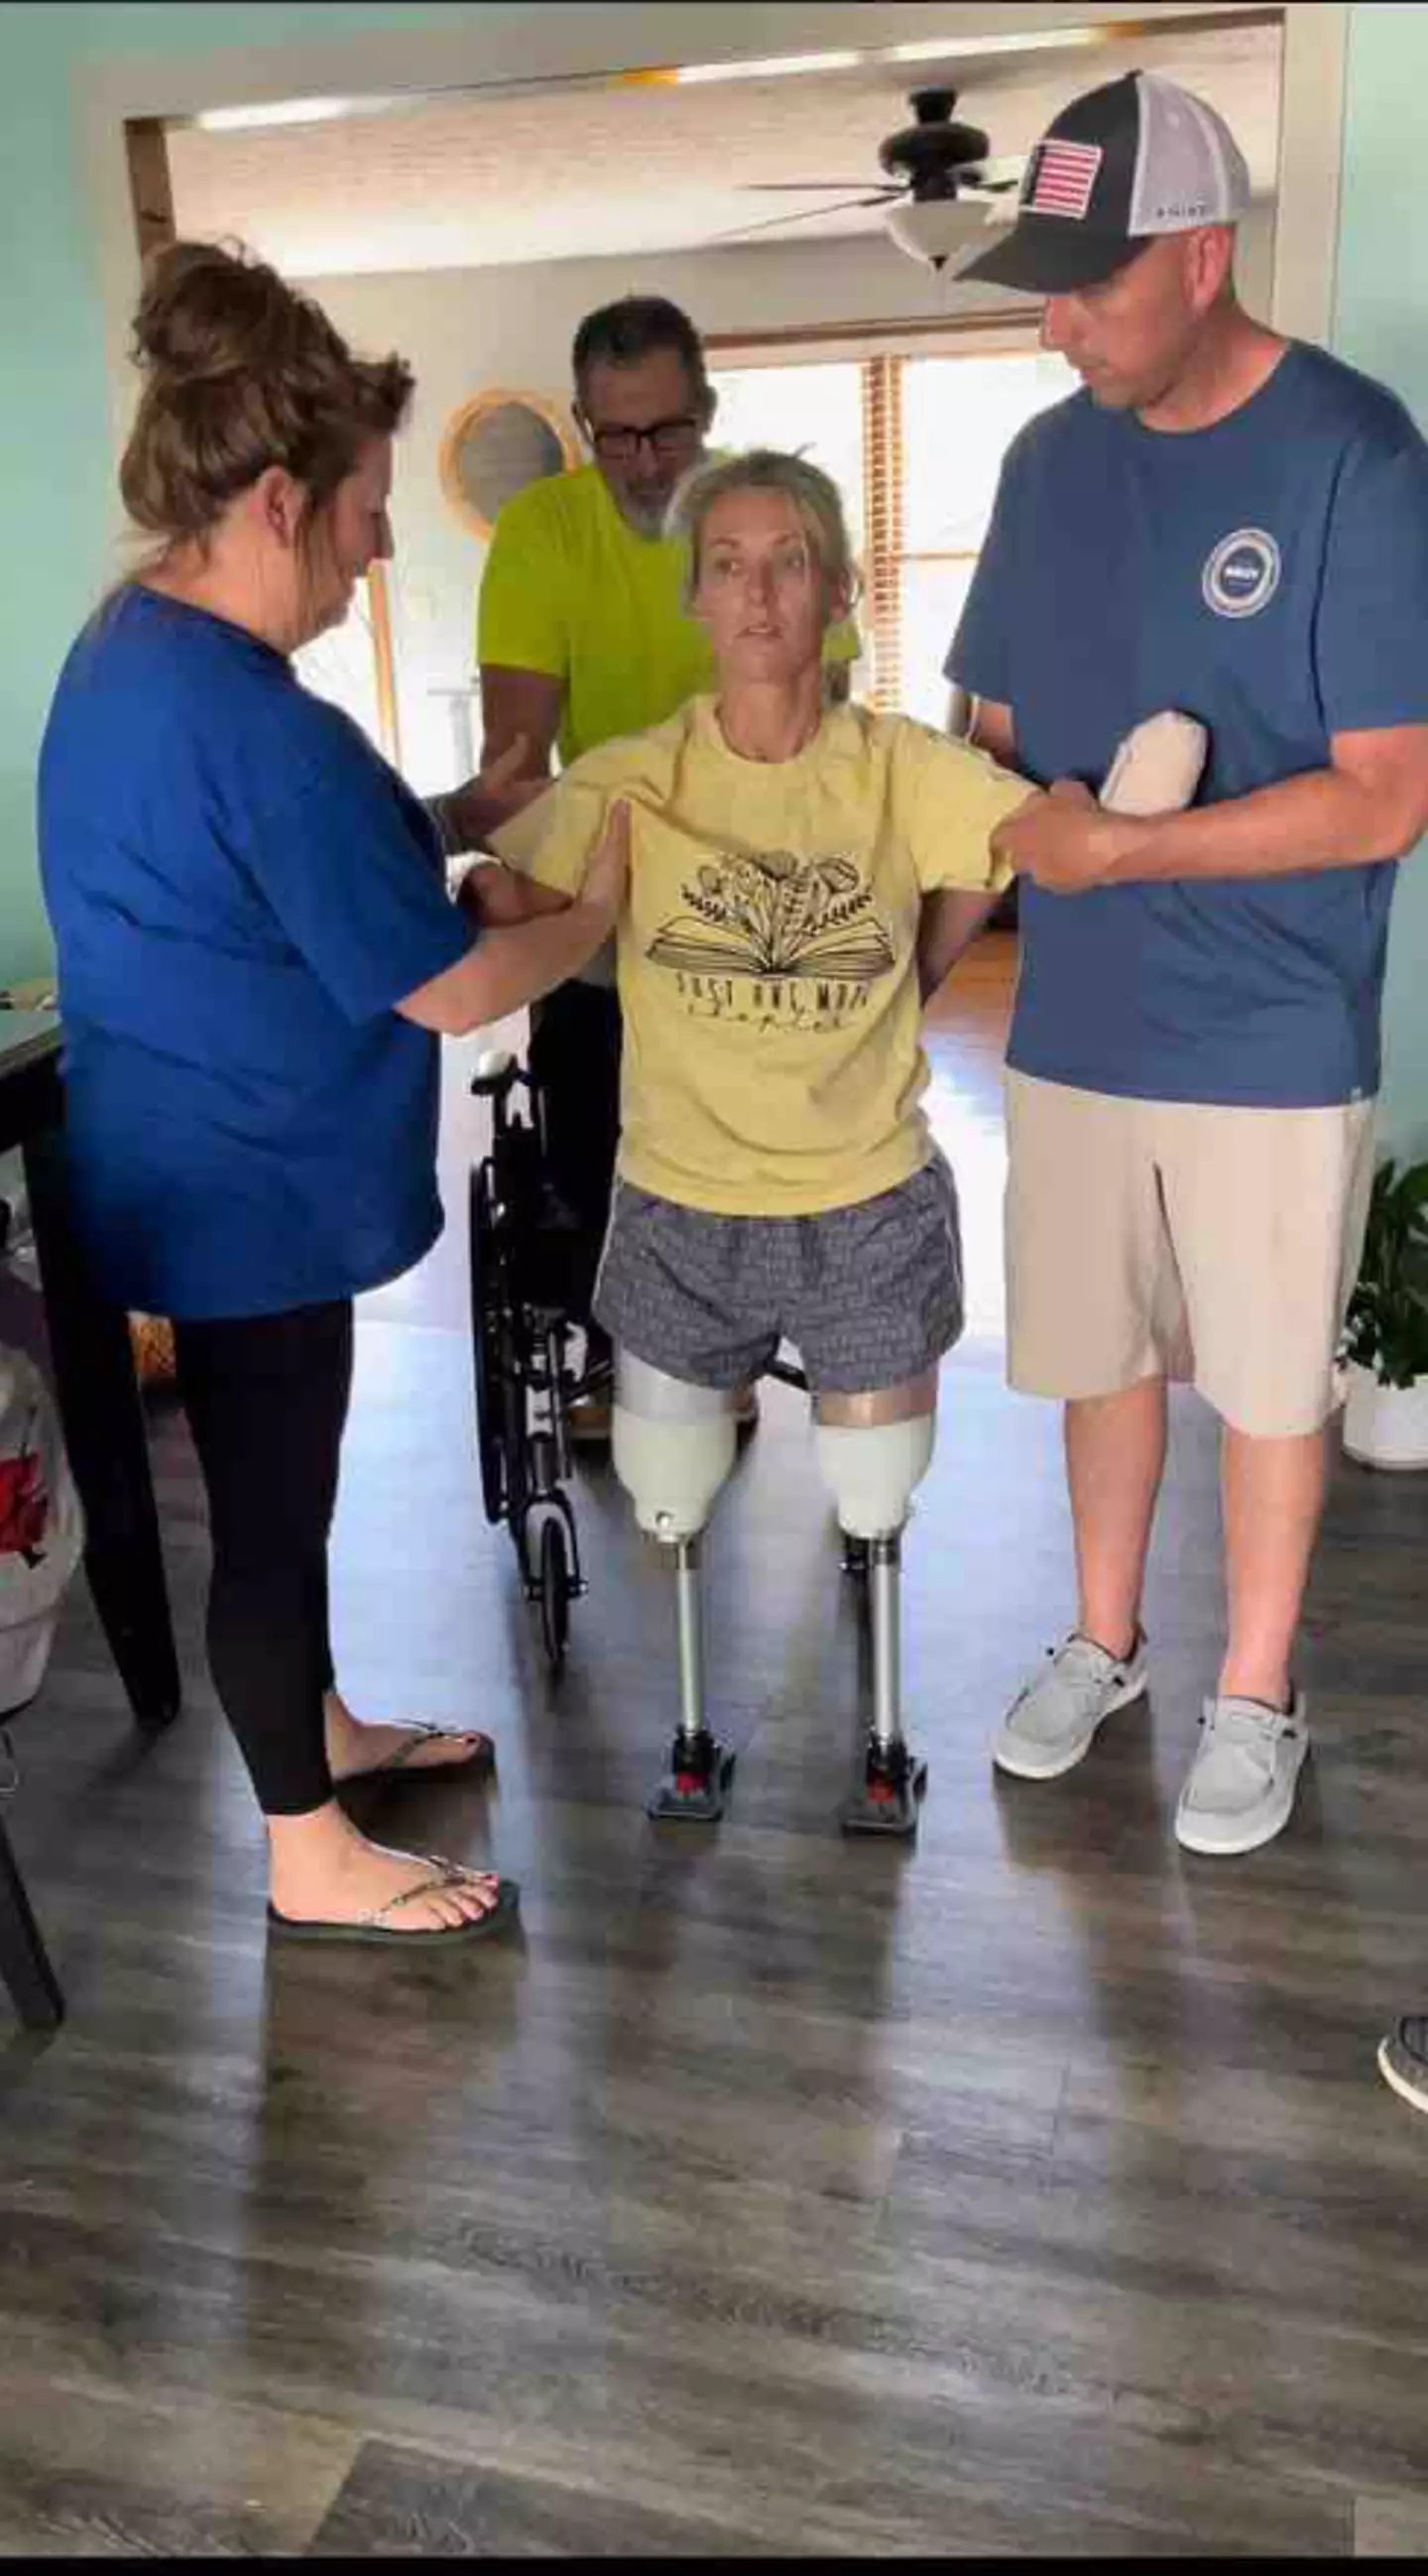 The latest update shows Cindy walking with her prosthetic legs. (GoFundMe/ Miraclesformullins)